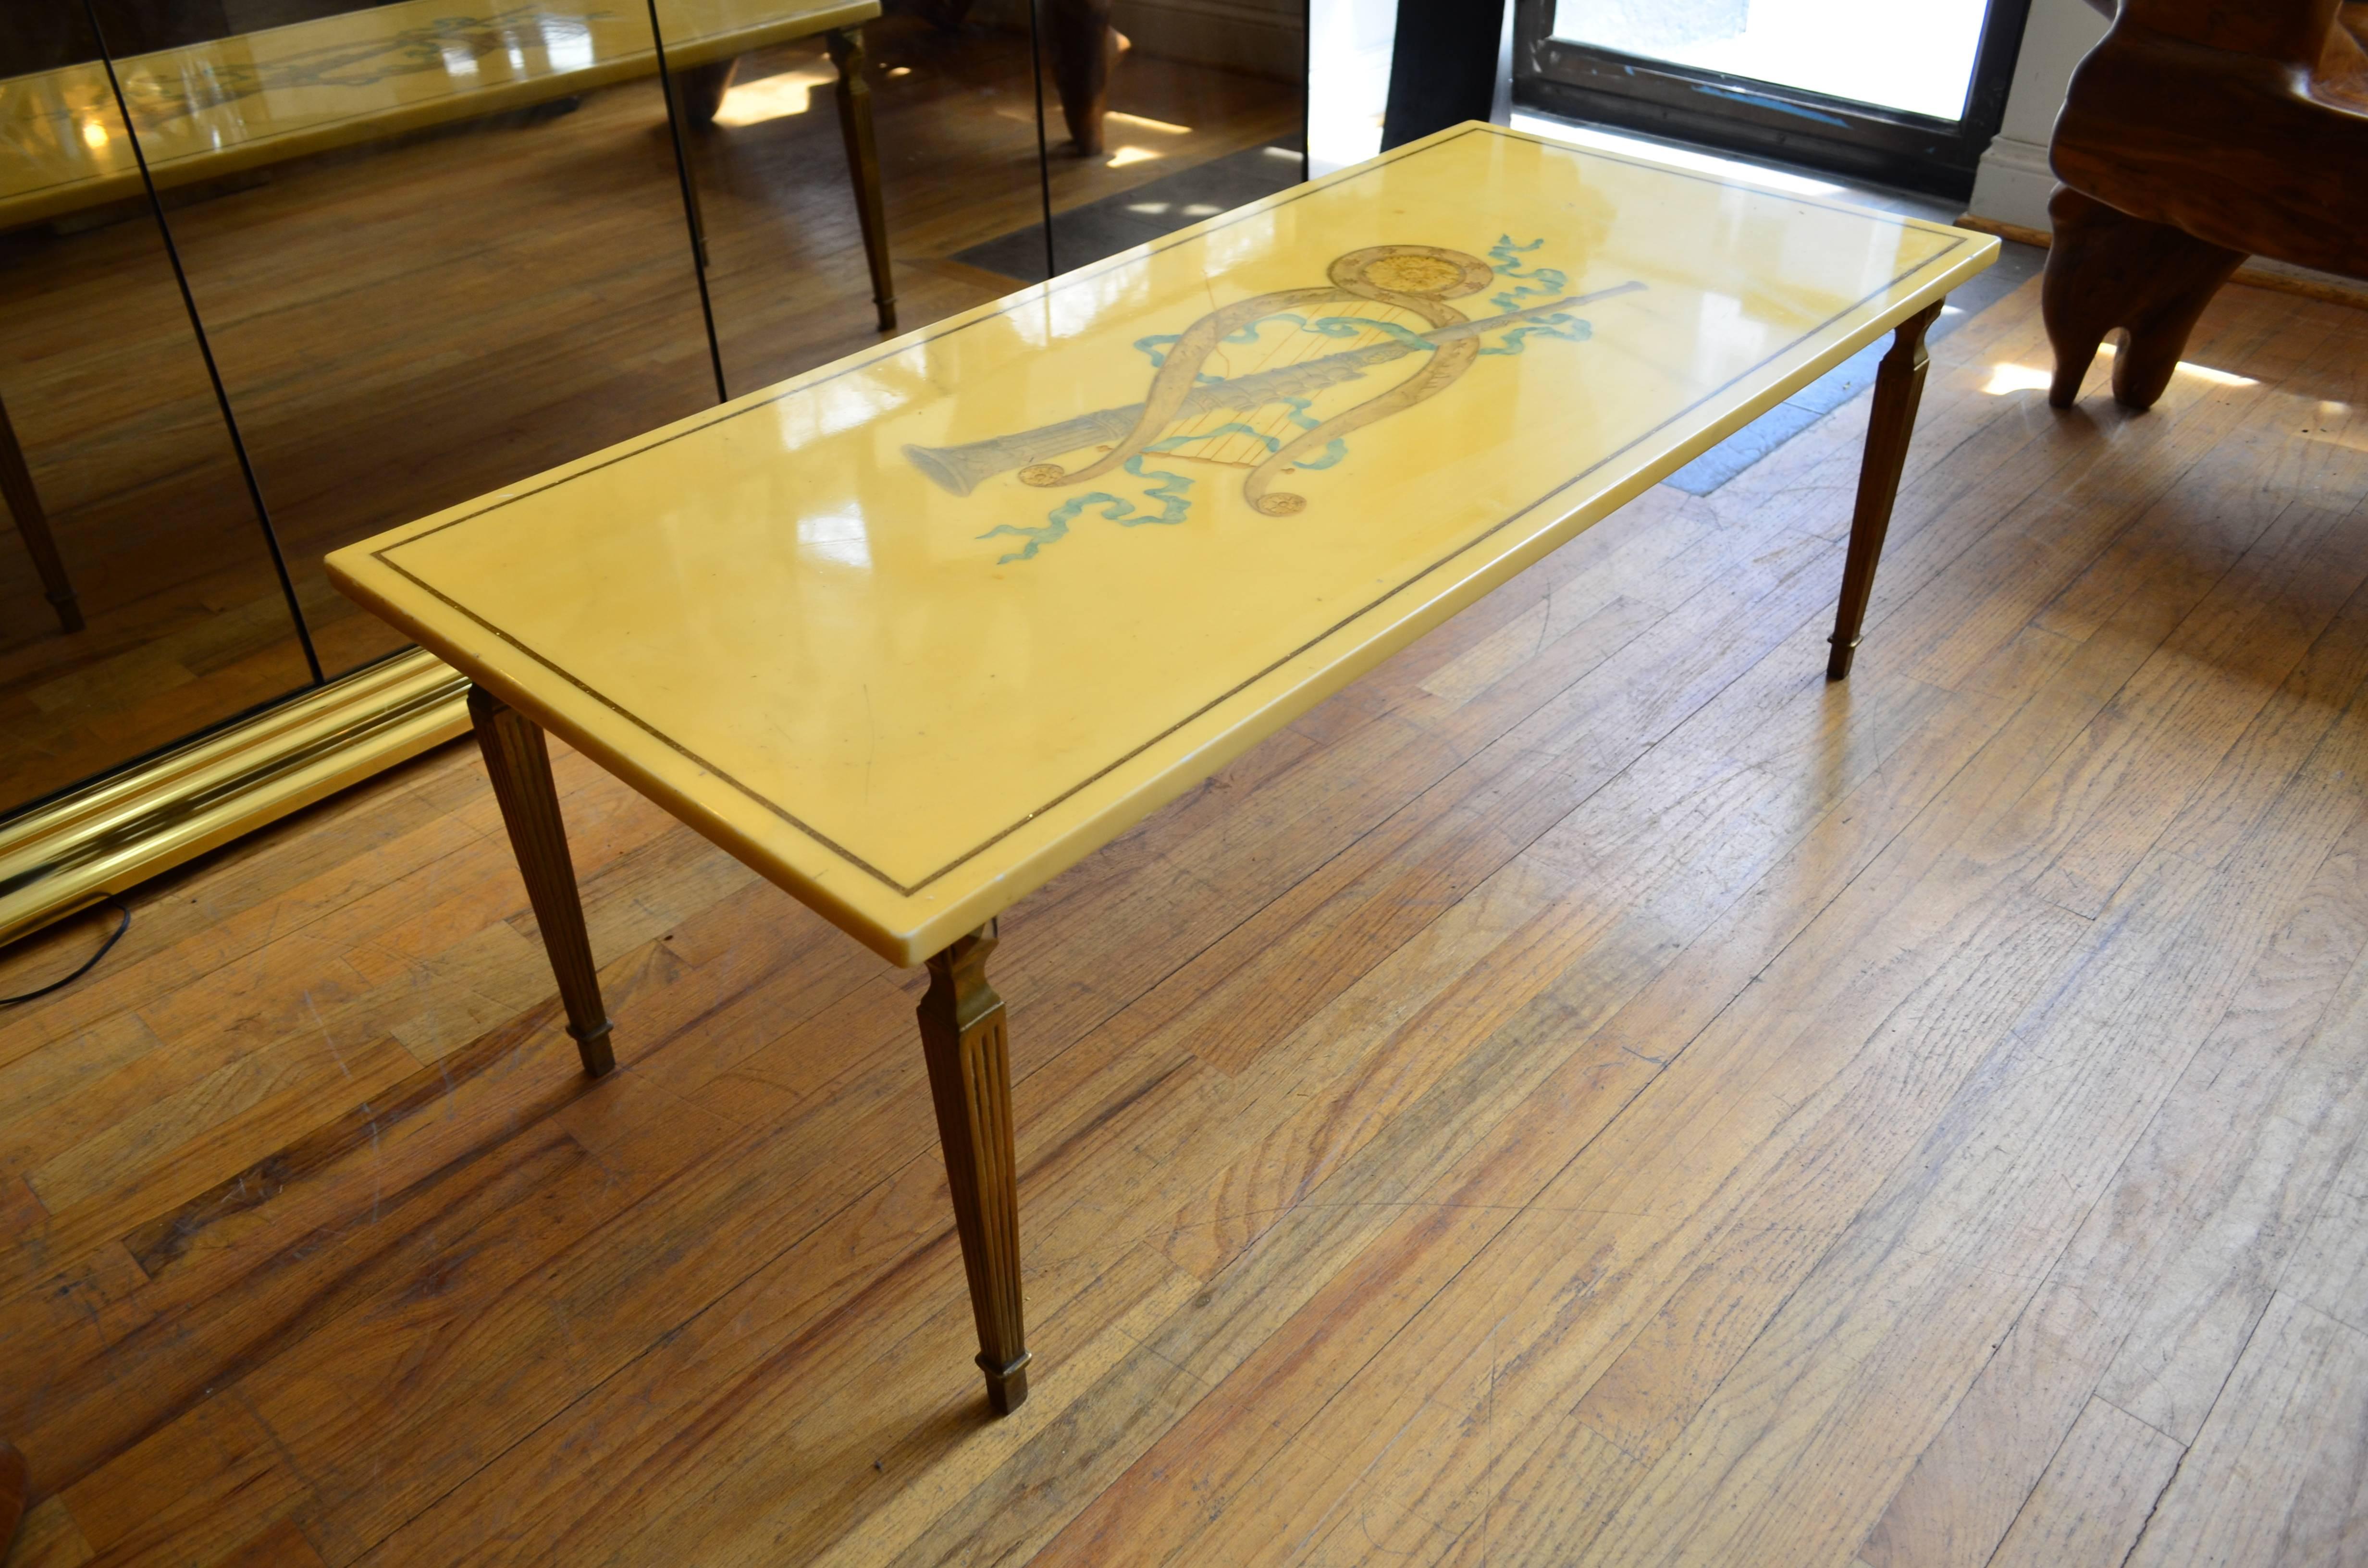 Marble coffee table with bronze legs by Emilio Martelli. Original label.